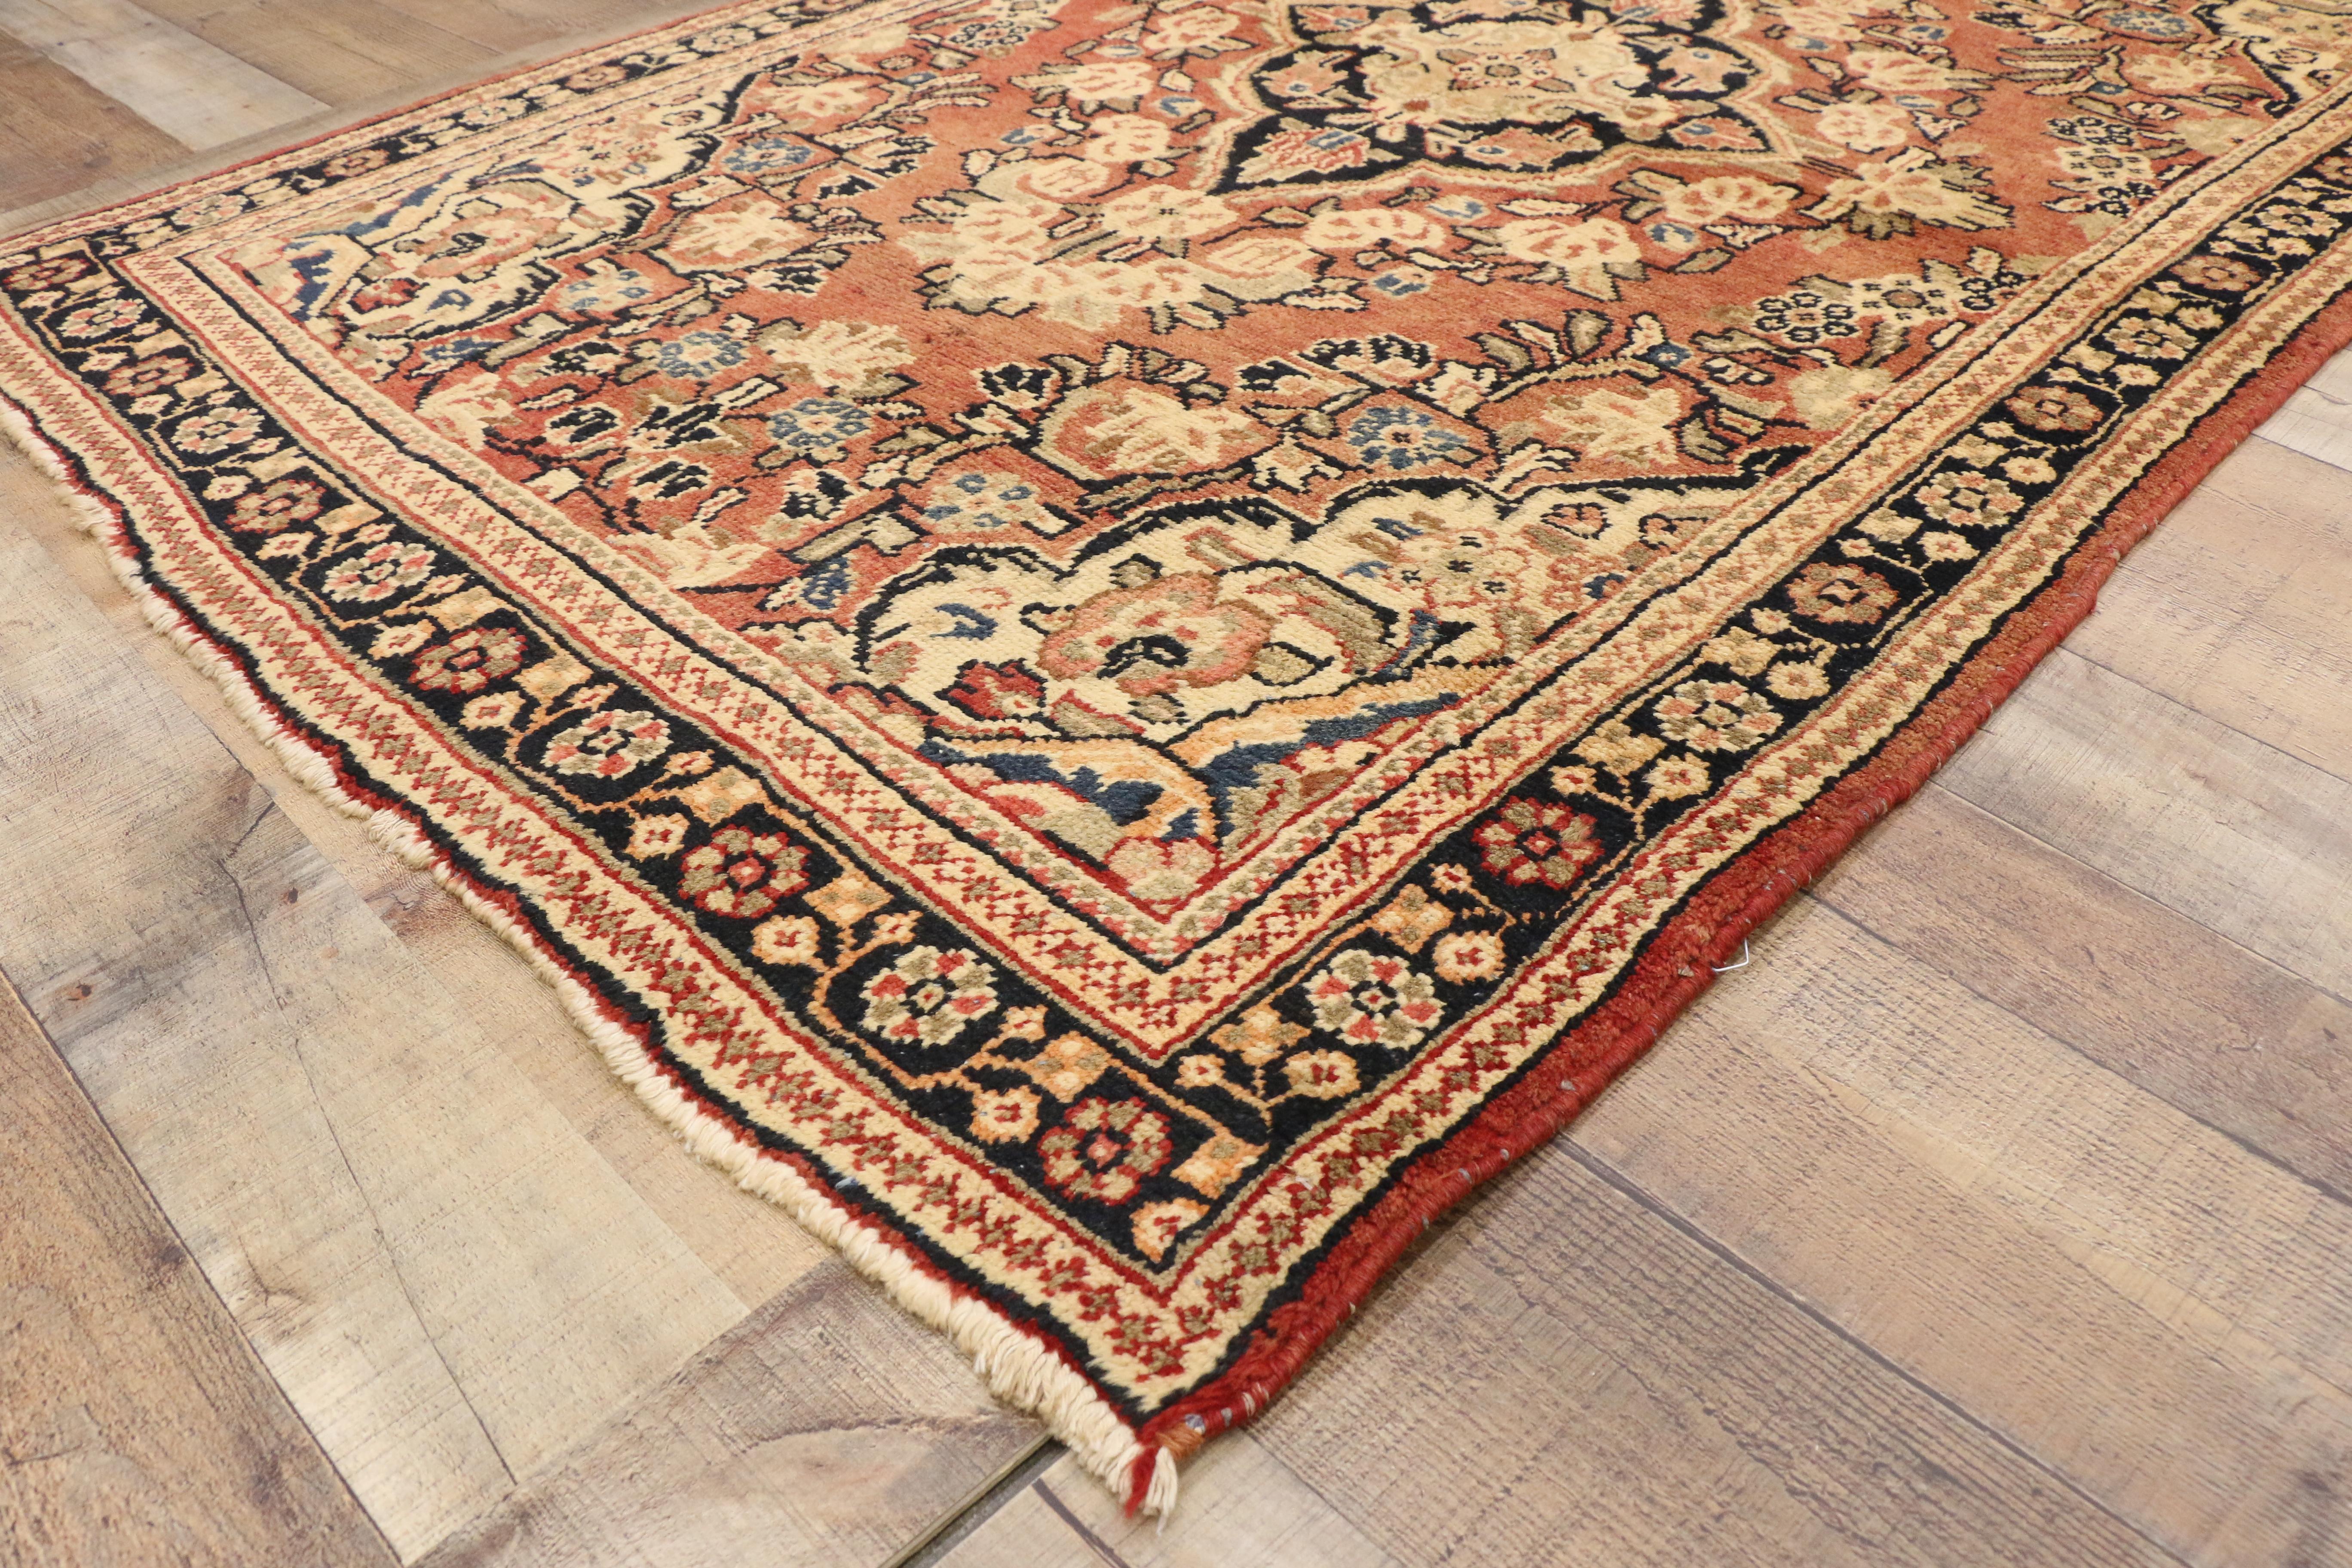 Vintage Persian Mahal Rug with Modern Rustic English Country Cottage Style  In Good Condition For Sale In Dallas, TX